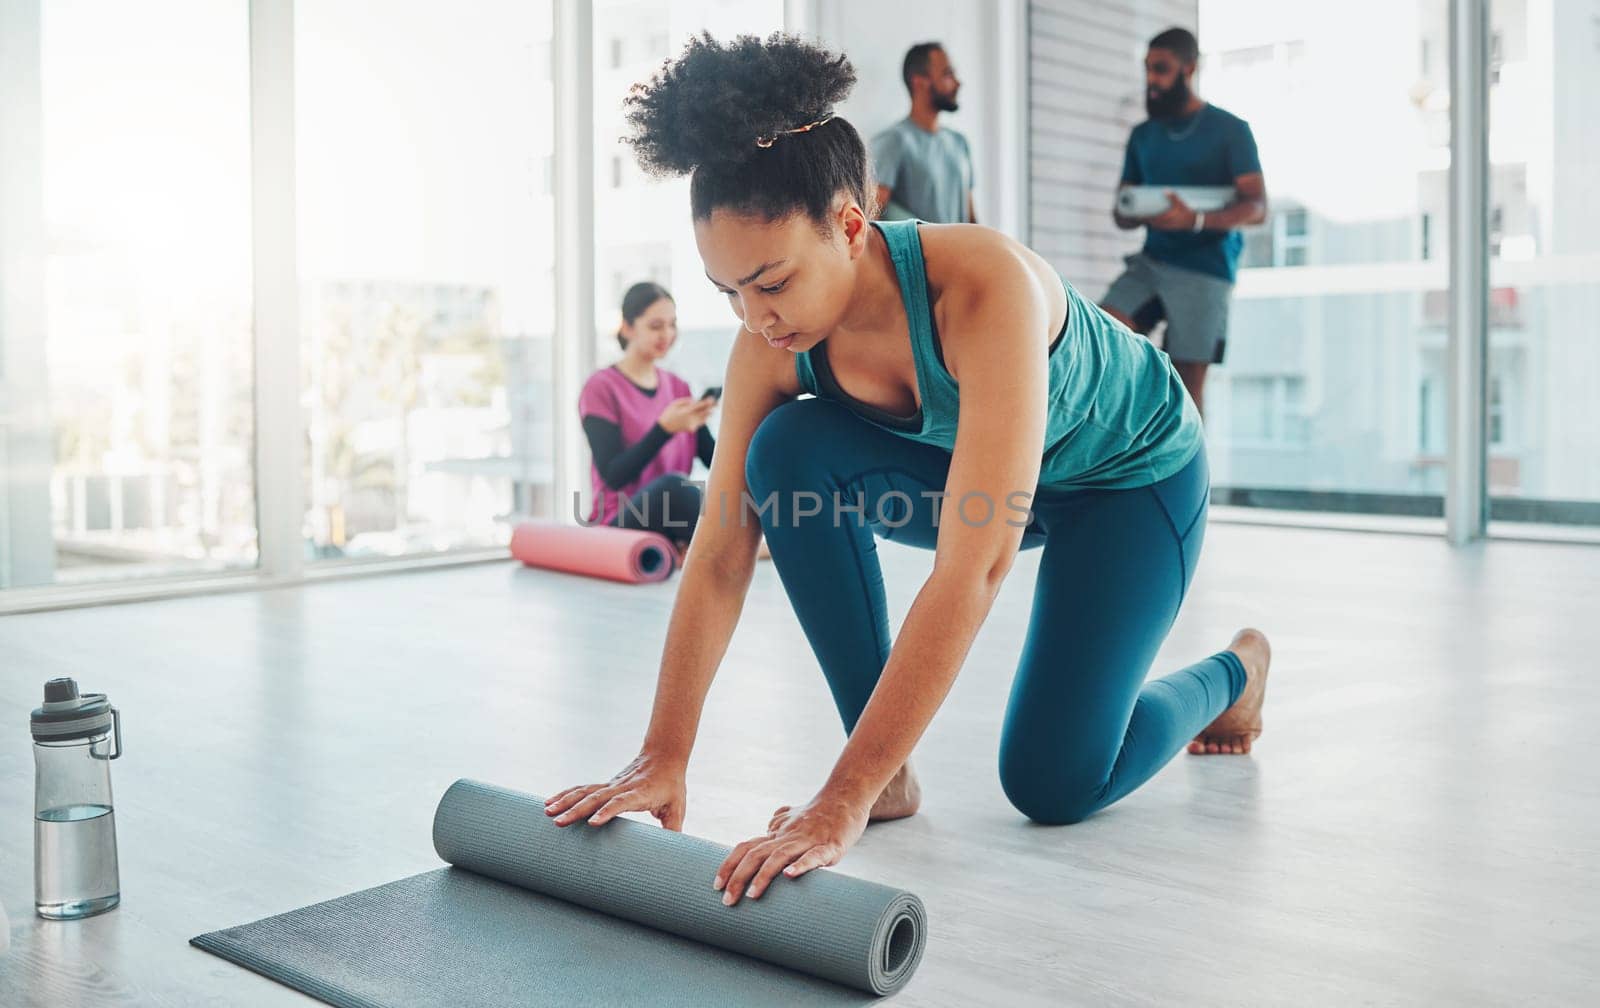 Yoga, studio and exercise mat with a fitness black woman getting ready for a wellness workout. Gym, training and zen with a female yogi indoor for mental health, balance or spiritual health by YuriArcurs